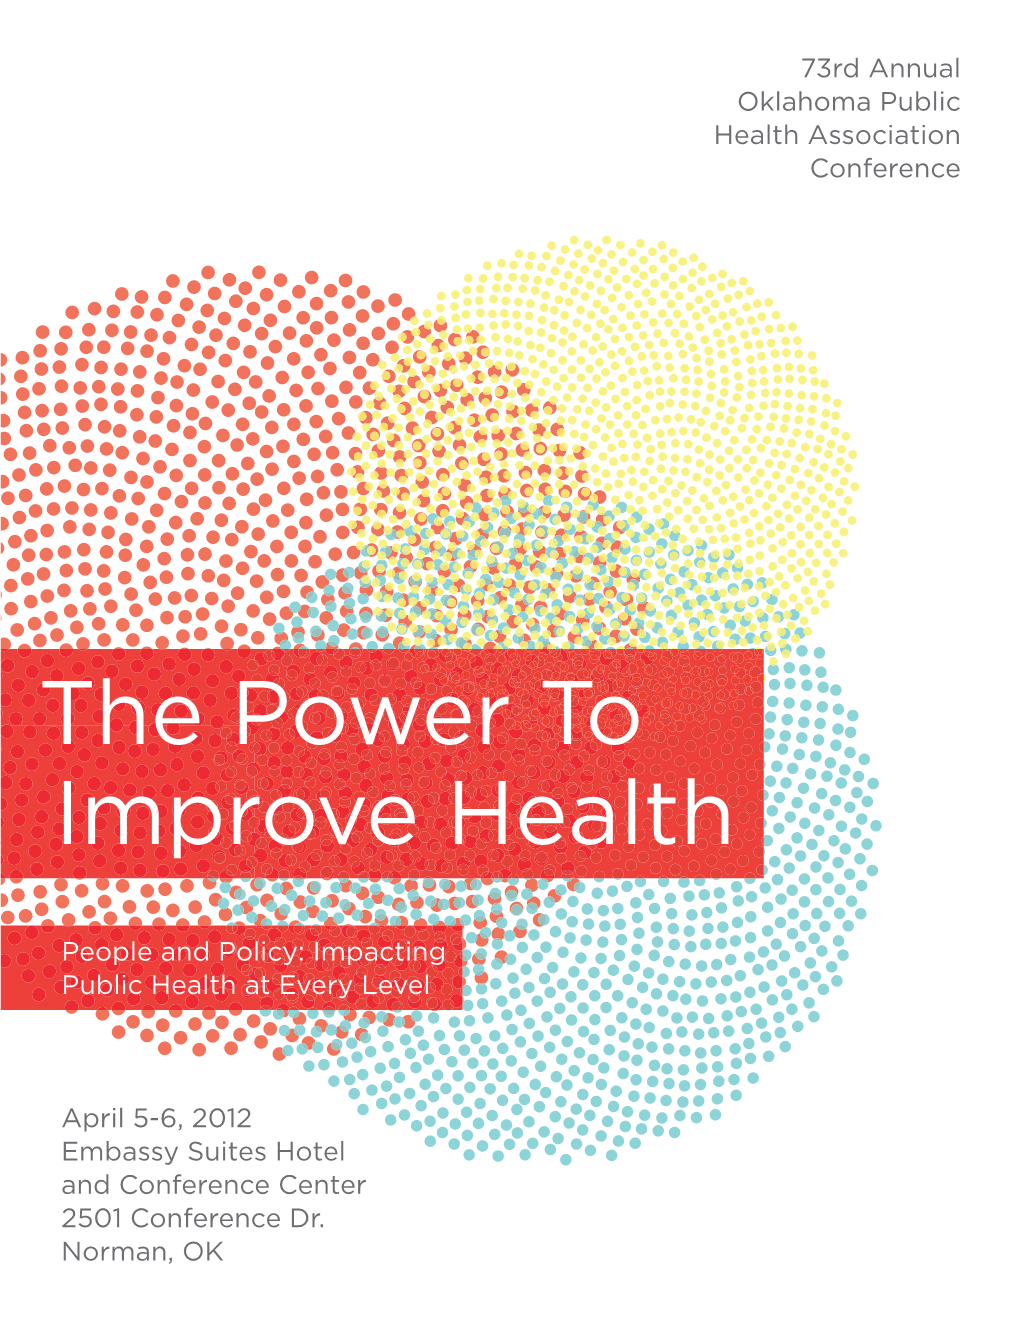 The Power to Improve Health